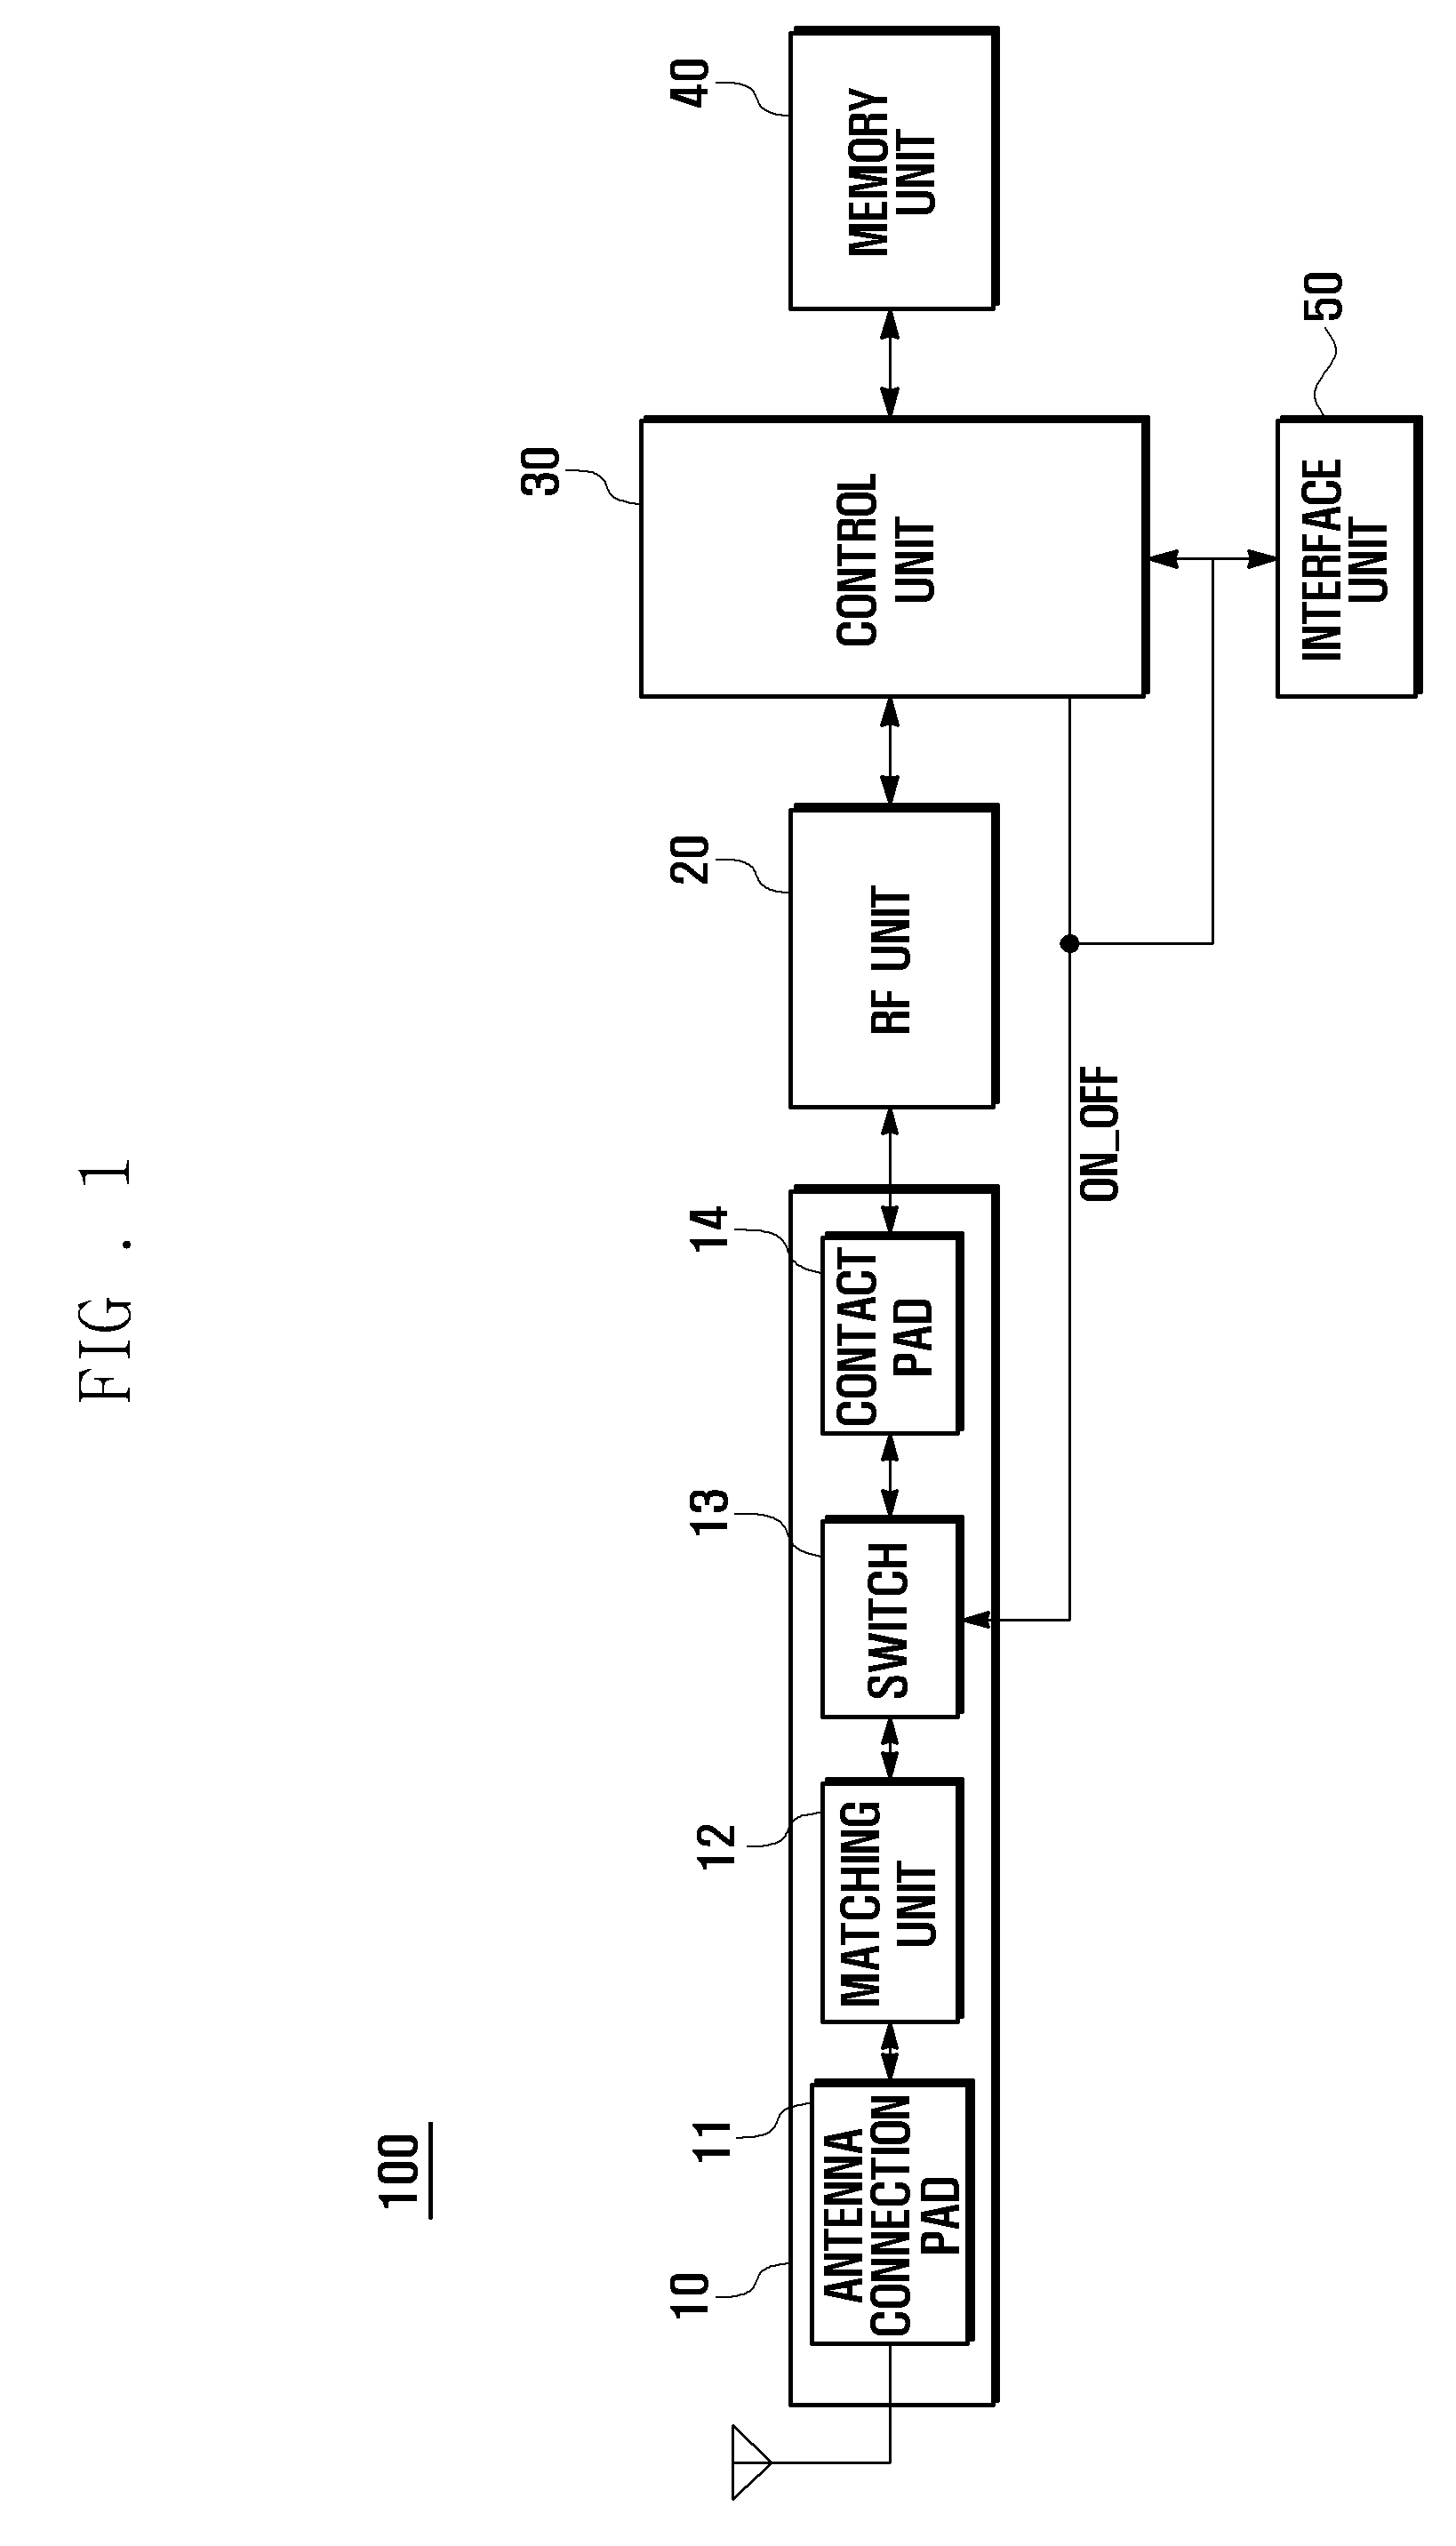 Mobile device, system, and method for measuring characteristics of the mobile device